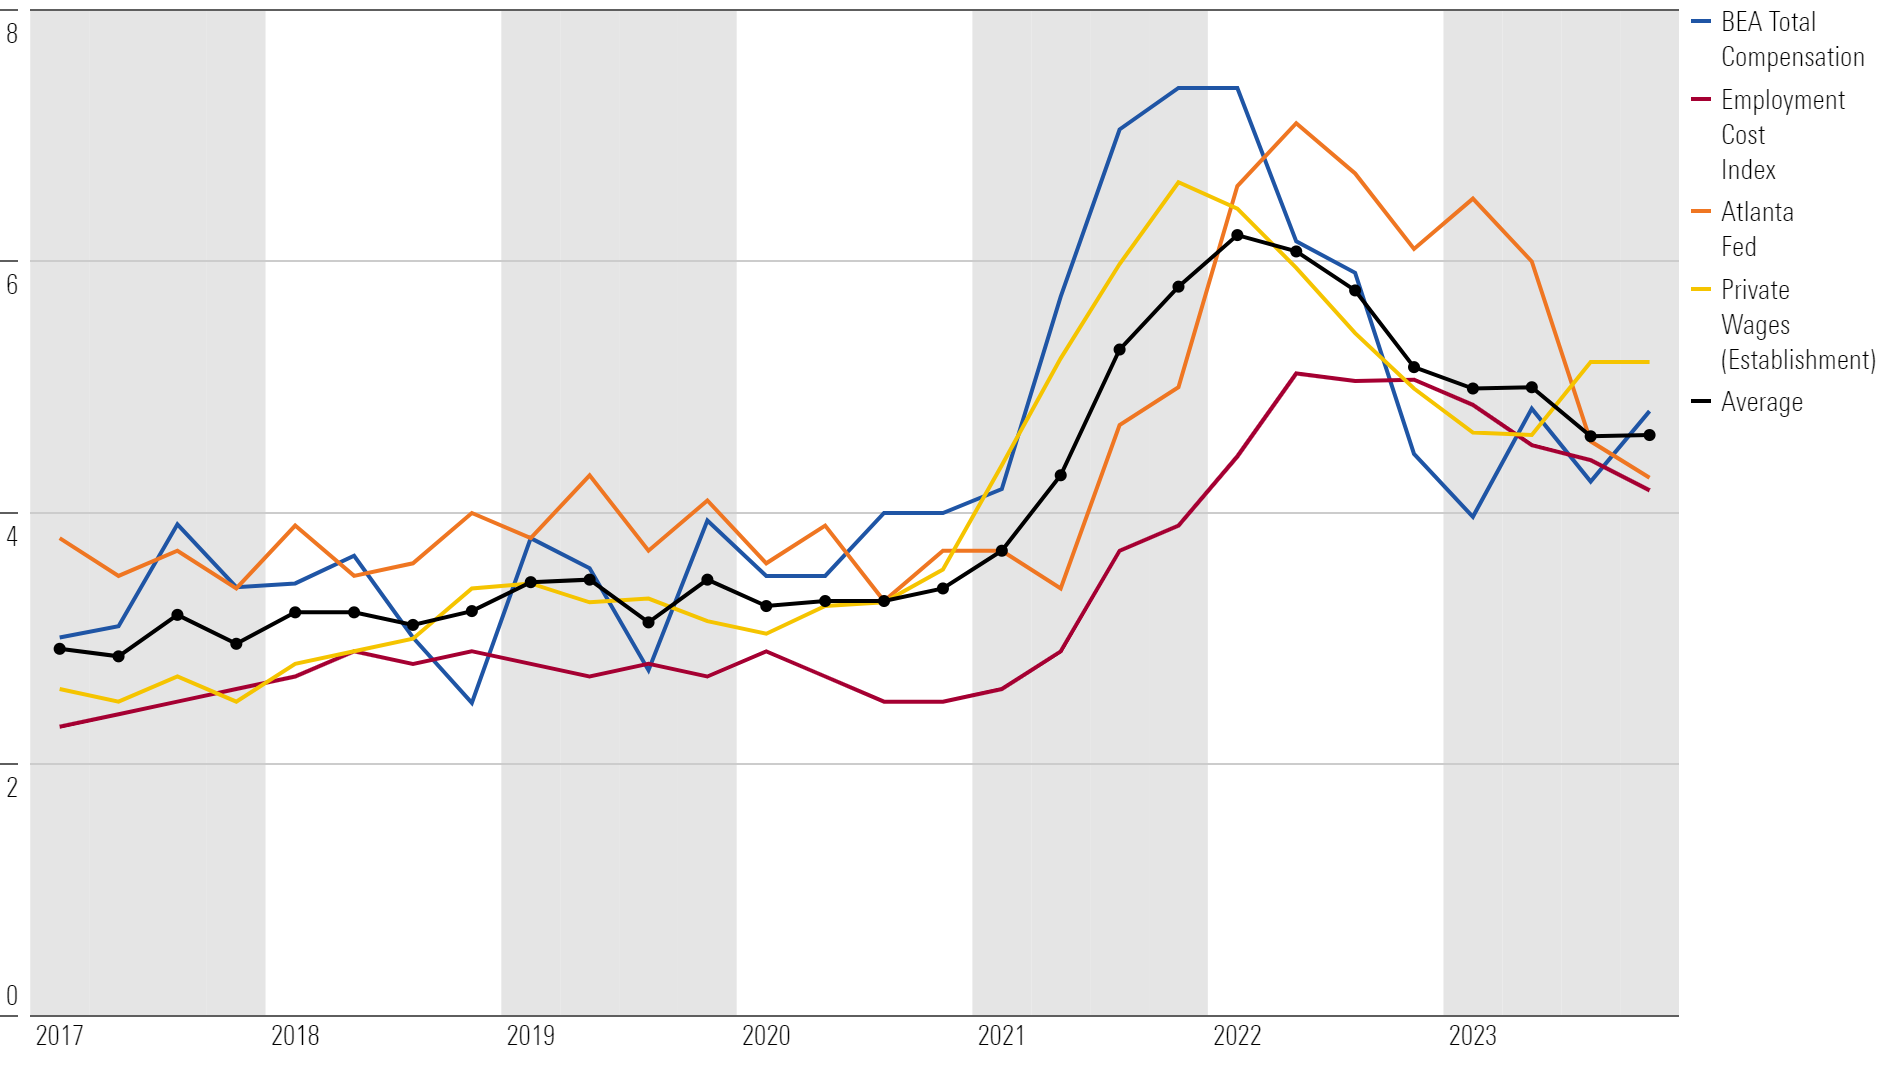 Line graph shows various wage growth measures, including BEA Total Compensation, Employment Cost Index, Atlanta Fed, Private Wages, and the average of these four.